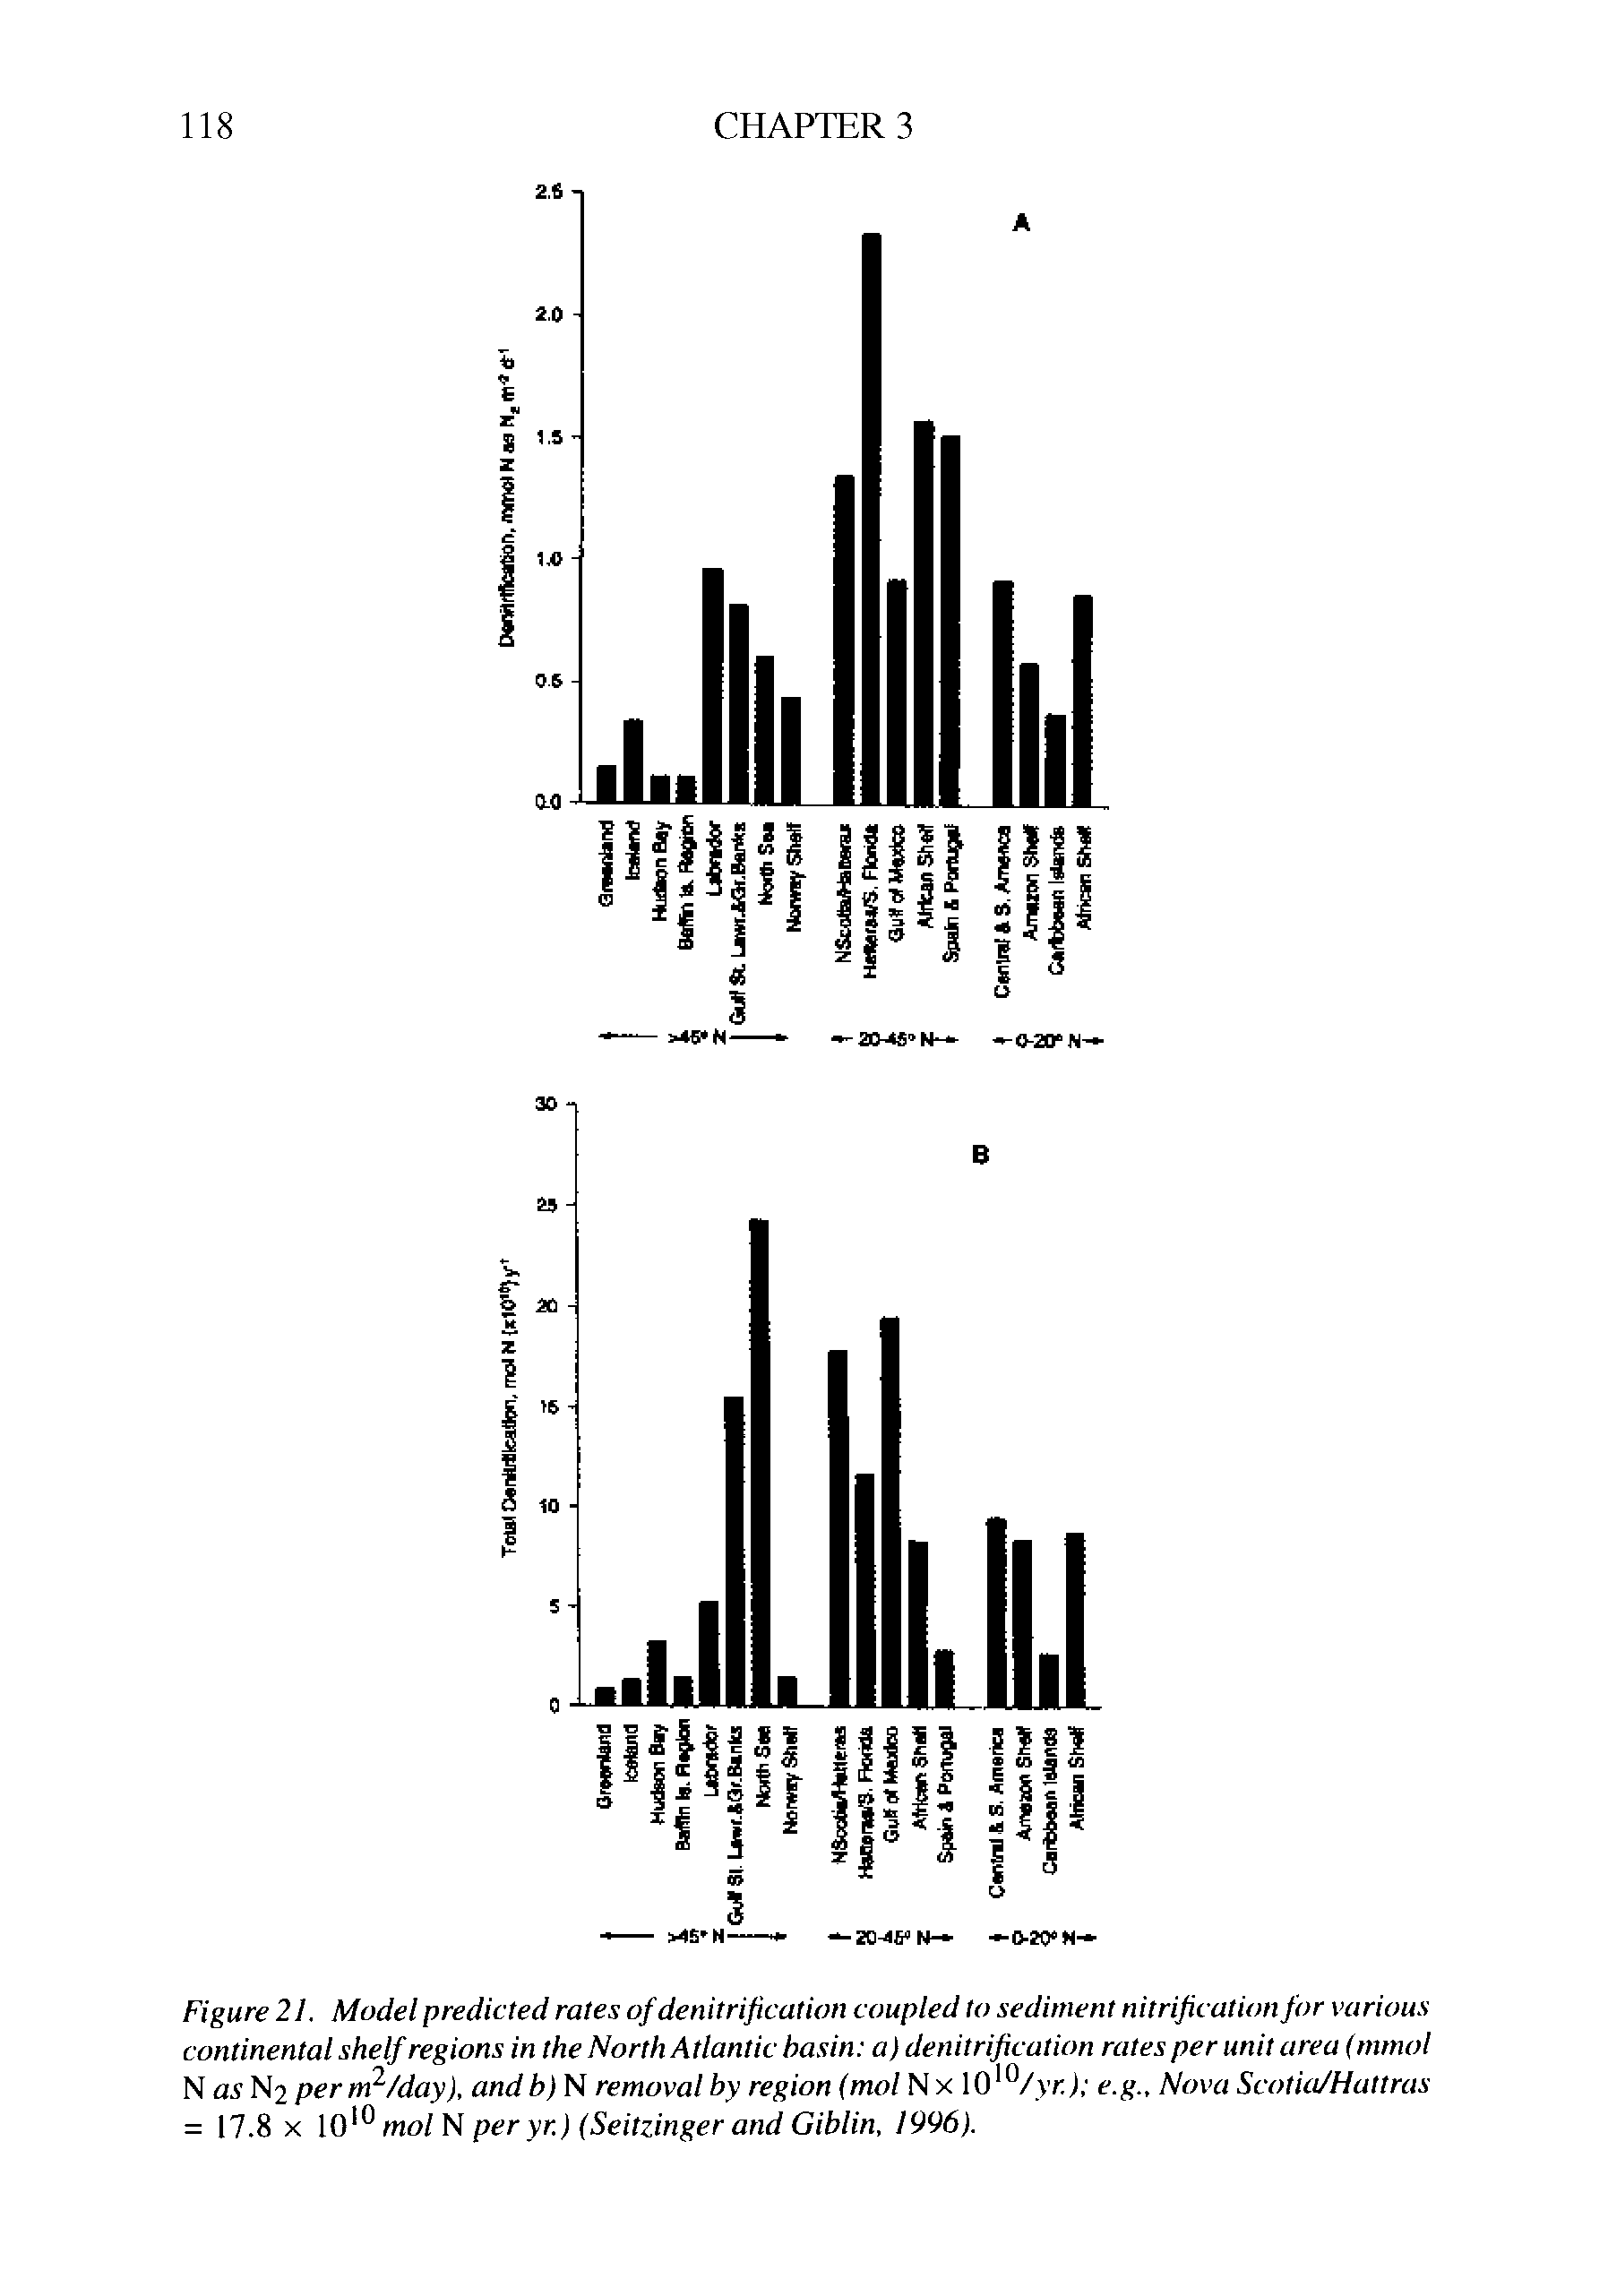 Figure 21. Model predicted rates of denitrification coupled to sediment nitrification for various continental shelf regions in the North Atlantic basin a) denitrification rates per unit area (mmol N as N2 perm /day), andb) N removal by region (mol N x j e.g.. Nova Scotia/Hattras...